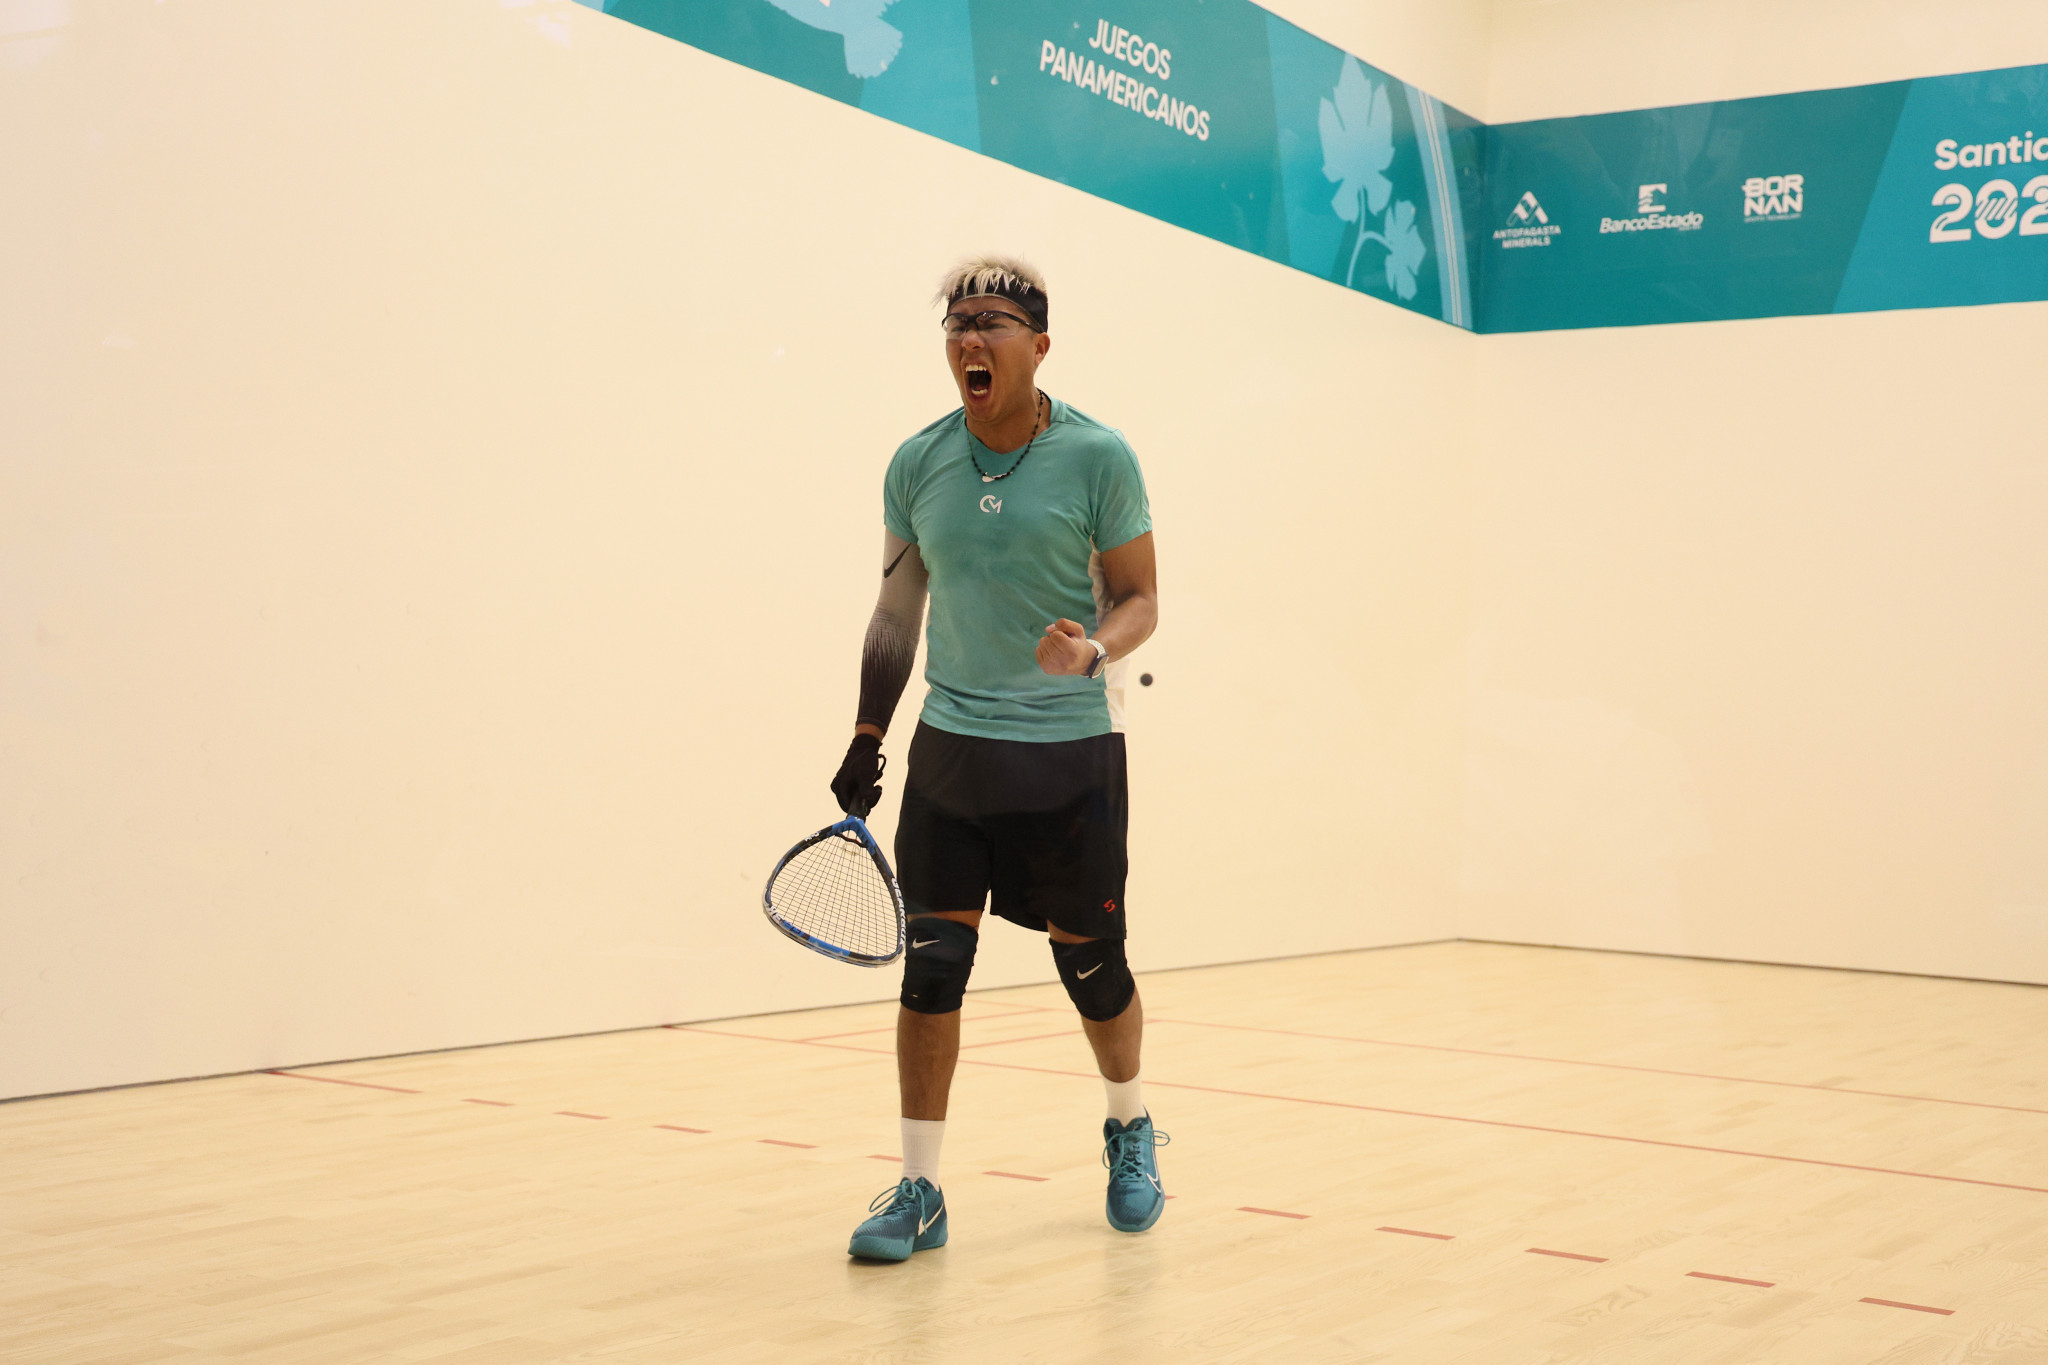 Conrrado Moscoso of Bolivia won his second racquetball gold medal of the Pan American Games ©Getty Images